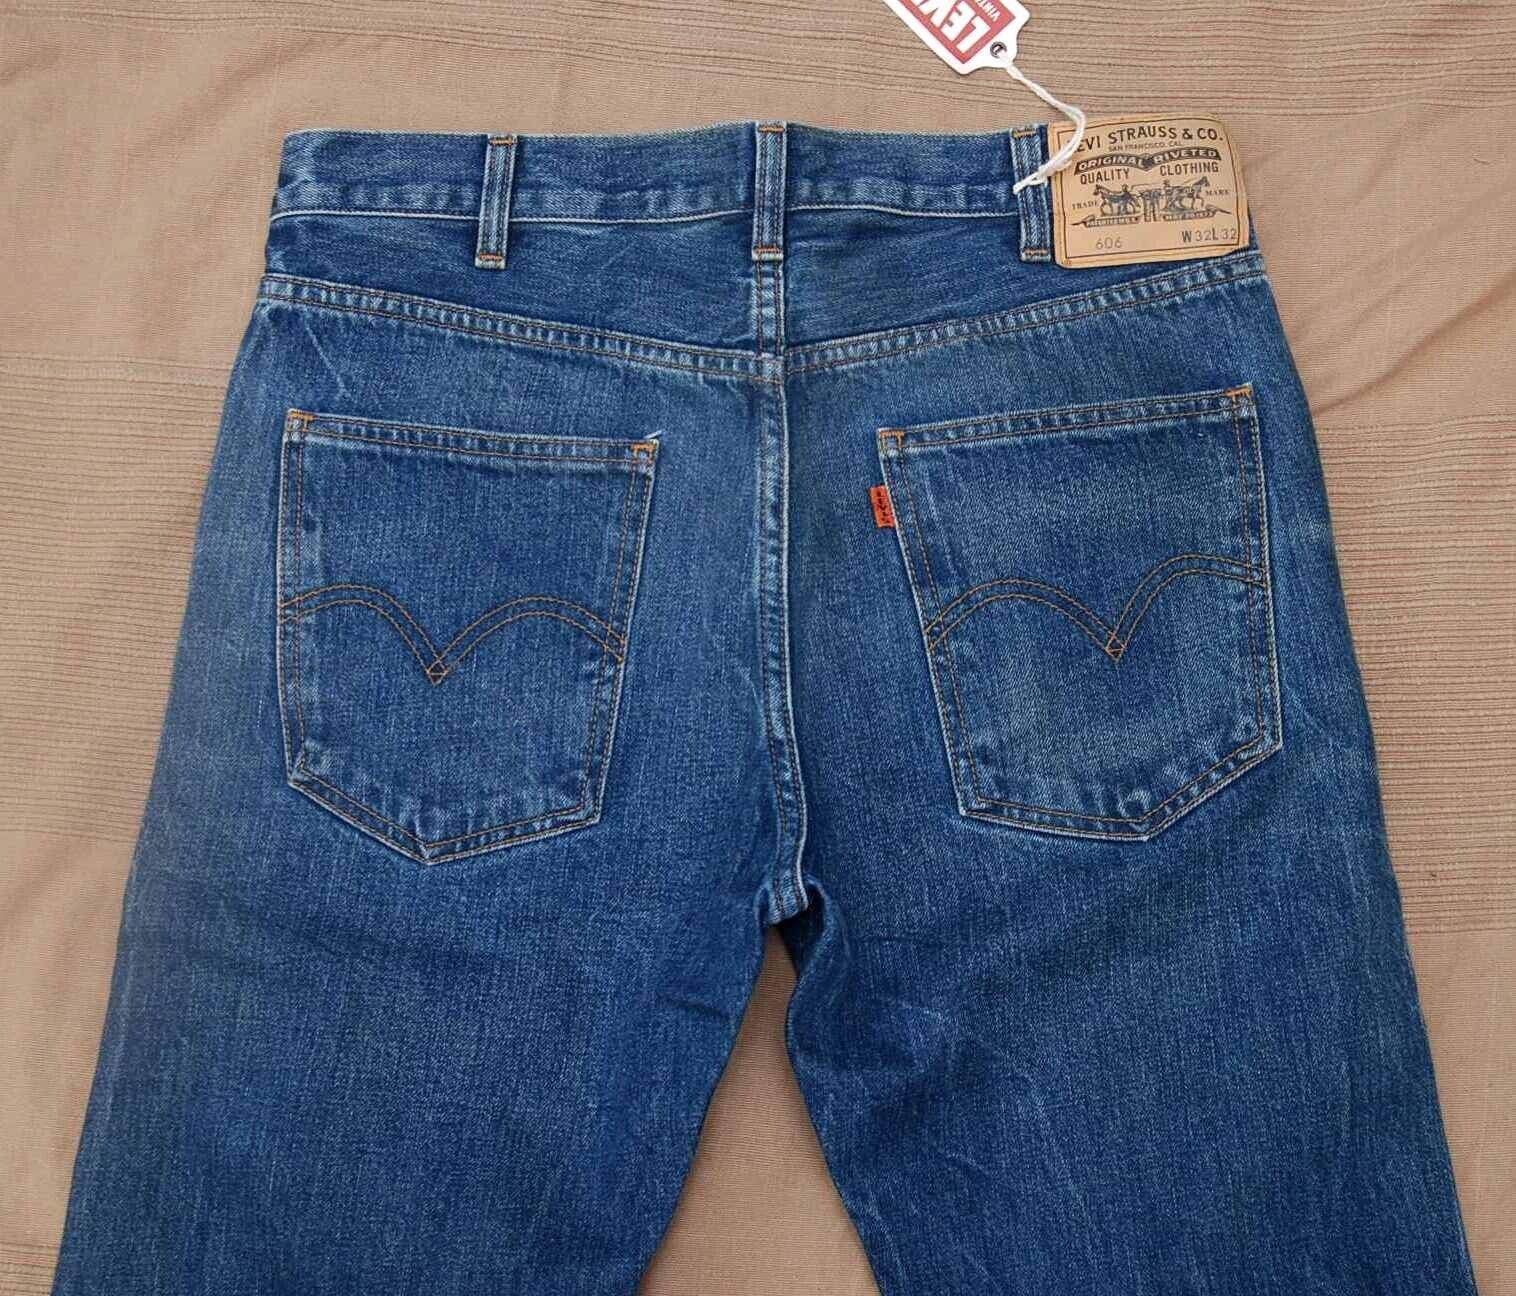 LEVI'S LEVIS 1969 606 JEANS VINTAGE COLLECTION 32/32 SAMPLE LIMITED VERY  RARE | eBay